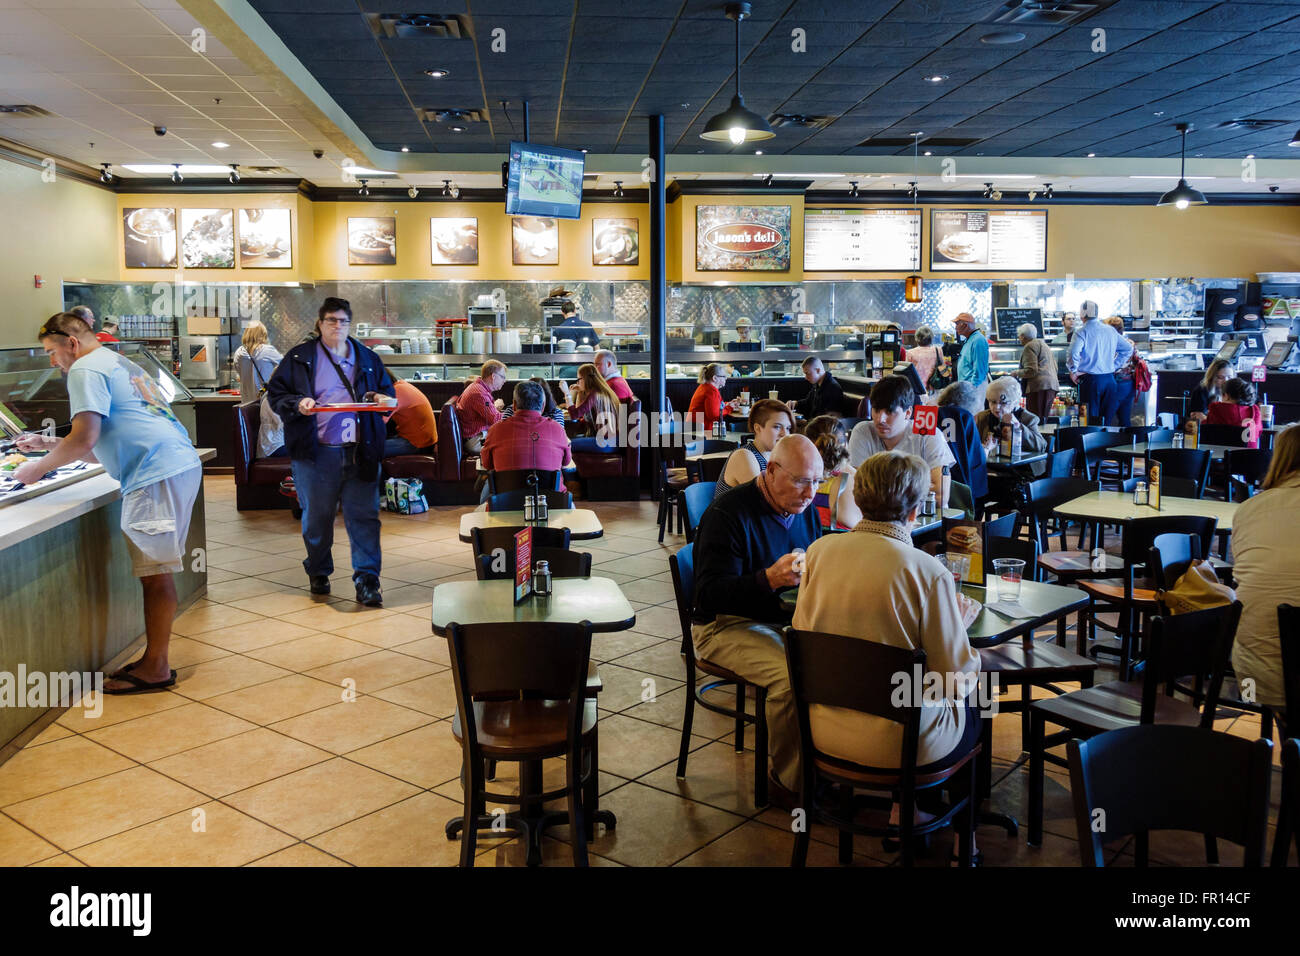 Florida,South,FL,Melbourne,Jason's Deli,restaurant restaurants food dining eating out cafe cafes bistro,interior inside,tables,busy,lunchtime,visitors Stock Photo